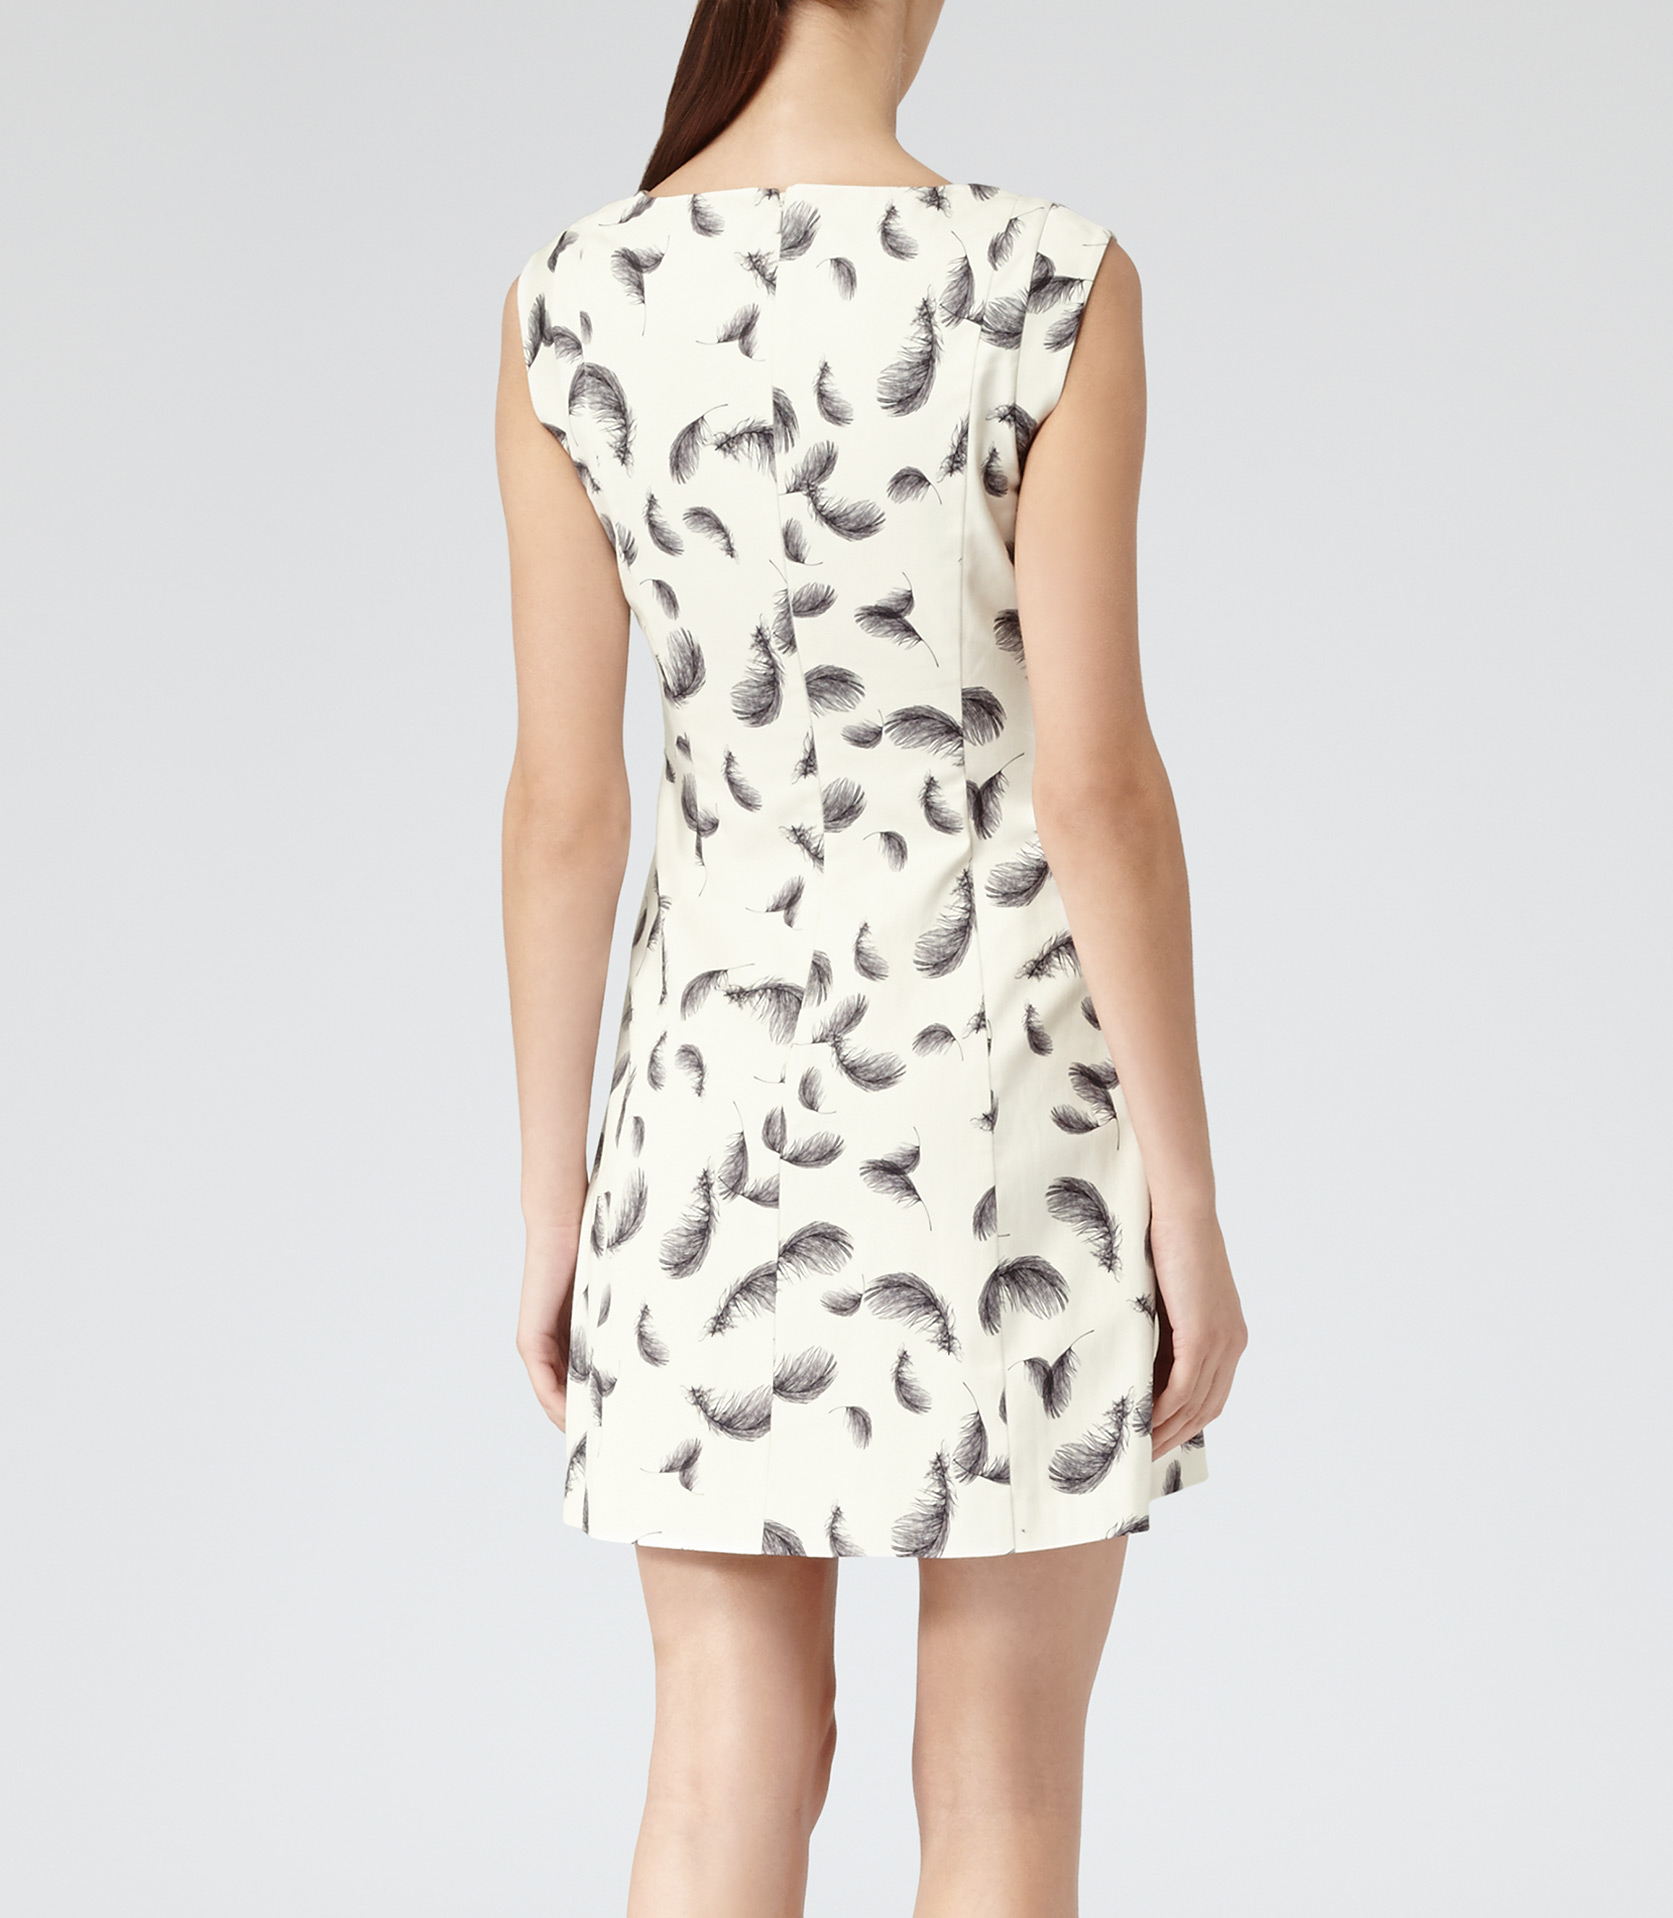 Reiss Ottoline Feather Print Dress in White - Lyst